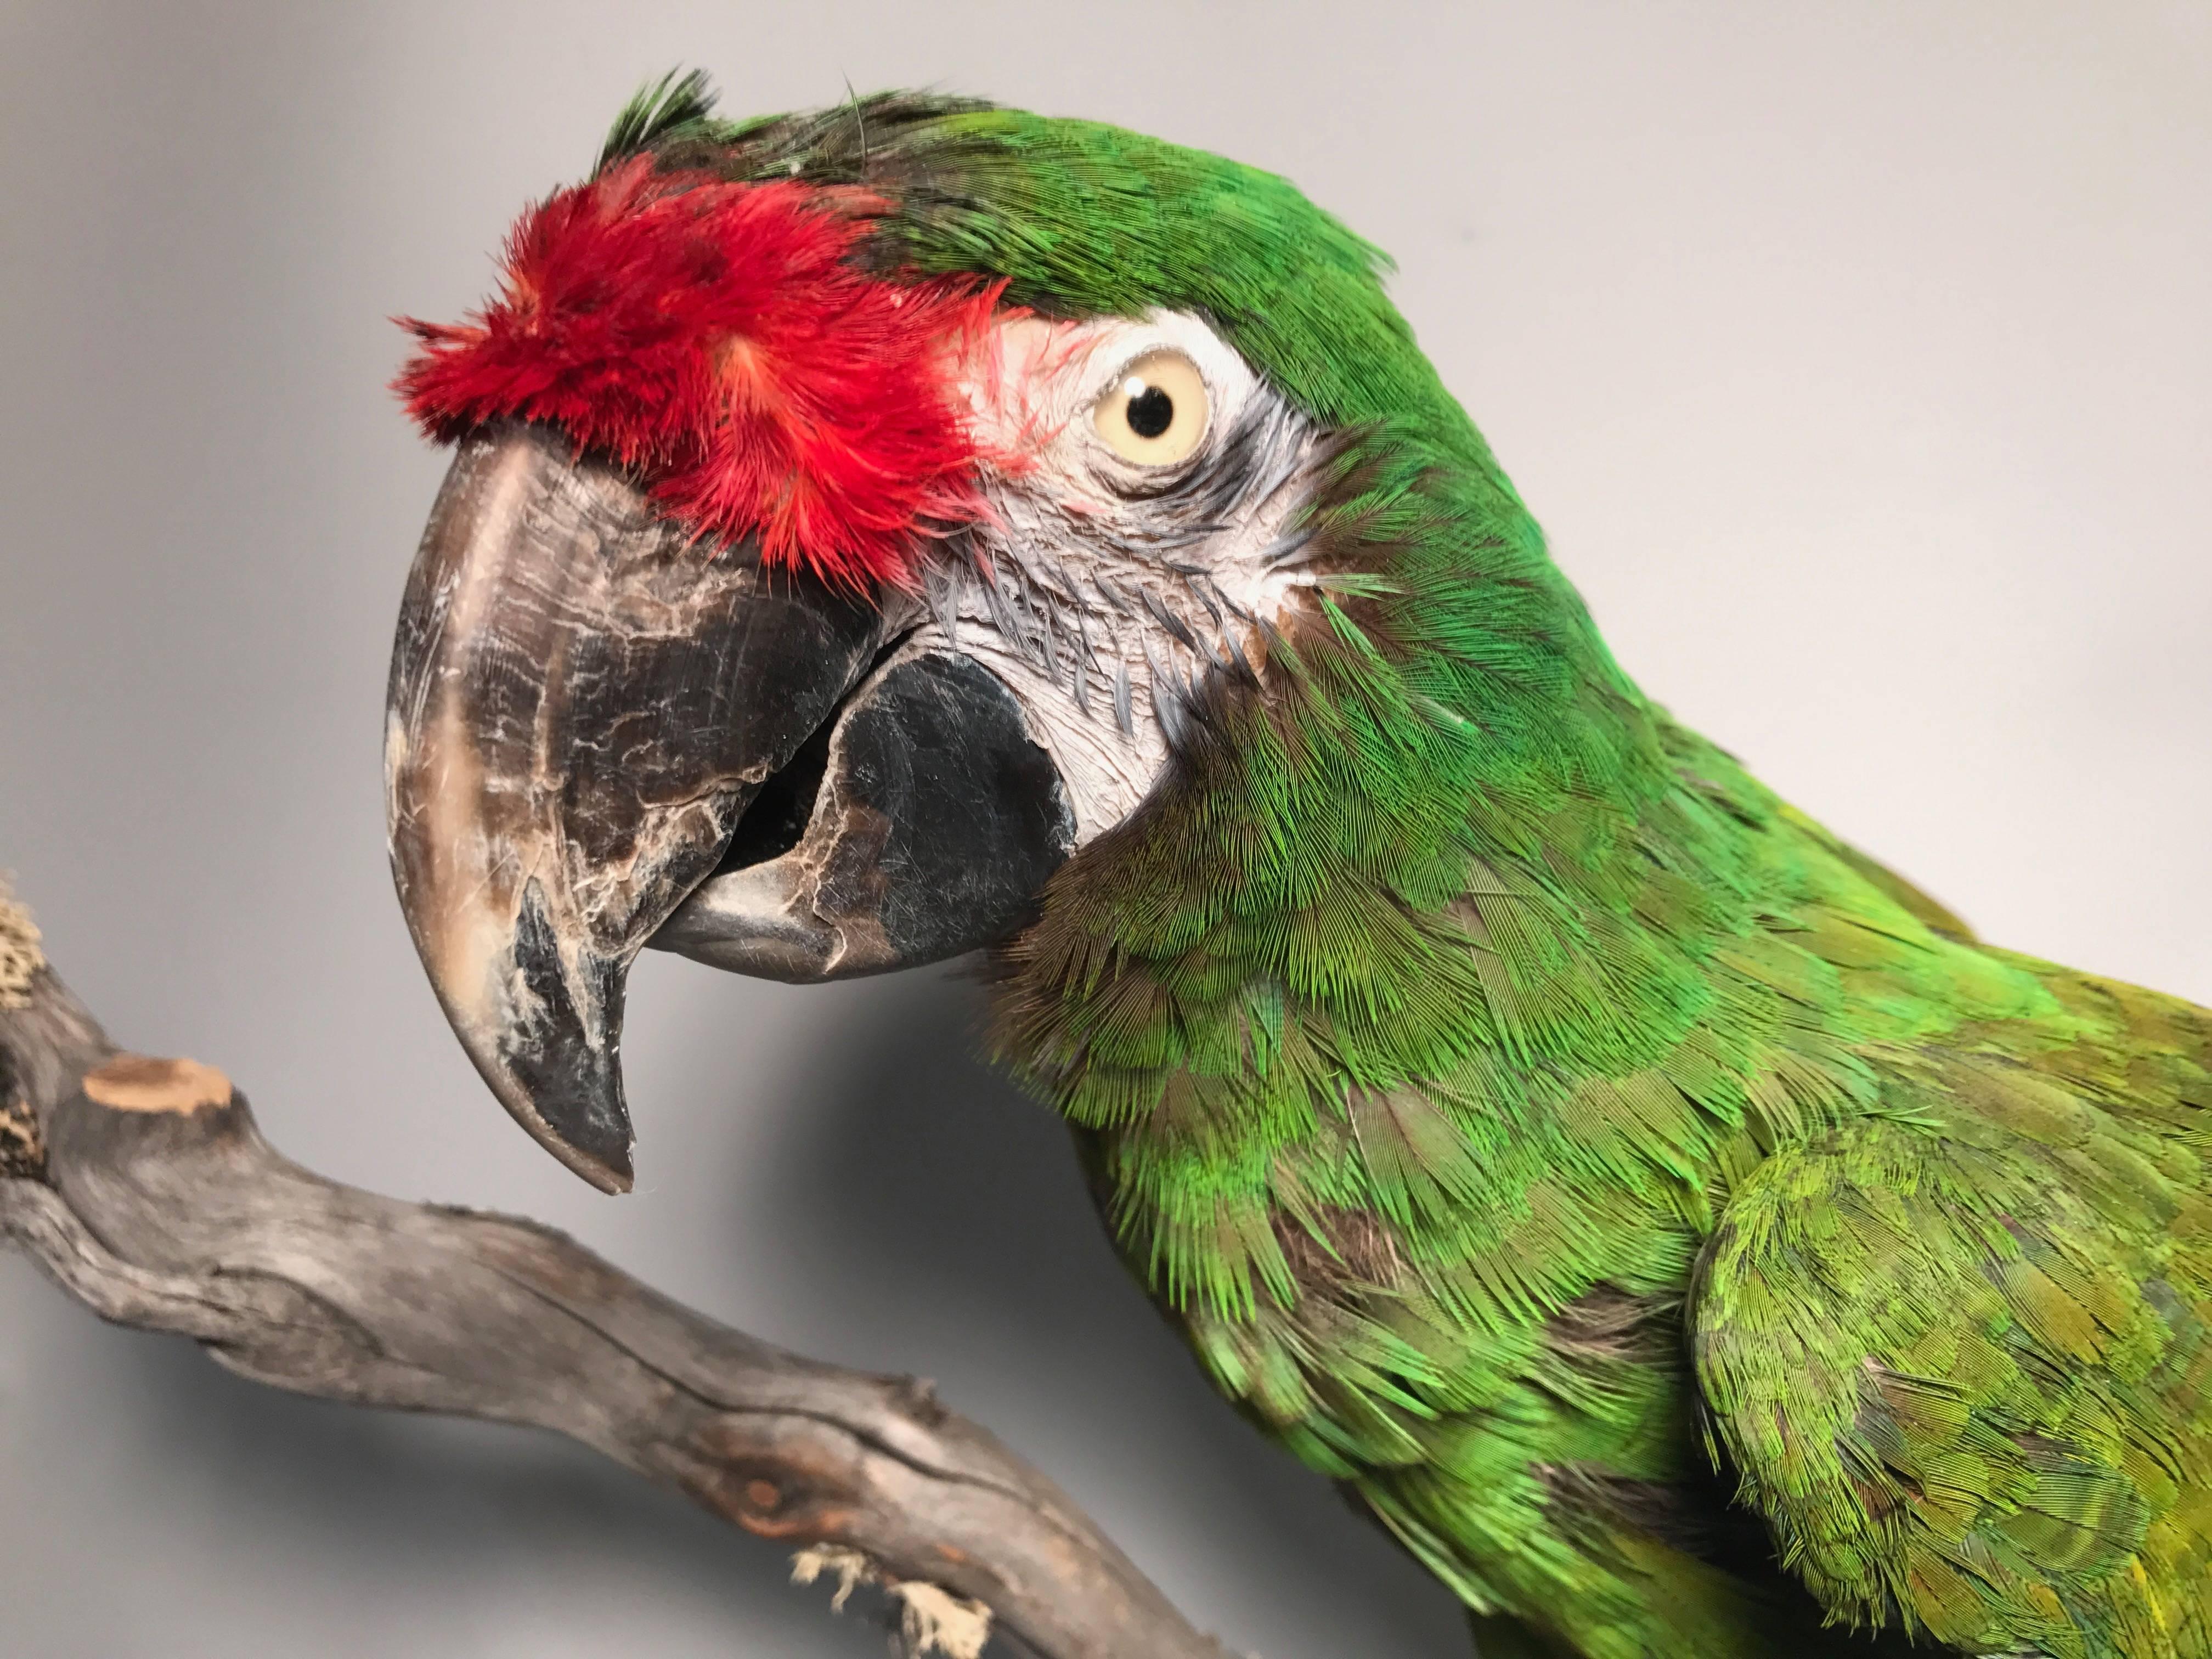 Taxidermied Military Macaw mounted on a wooden branch and black painted base. Military Macaws are generally found in Central and South America. This specimen is beautifully mounted and would make a great addition to any collection.